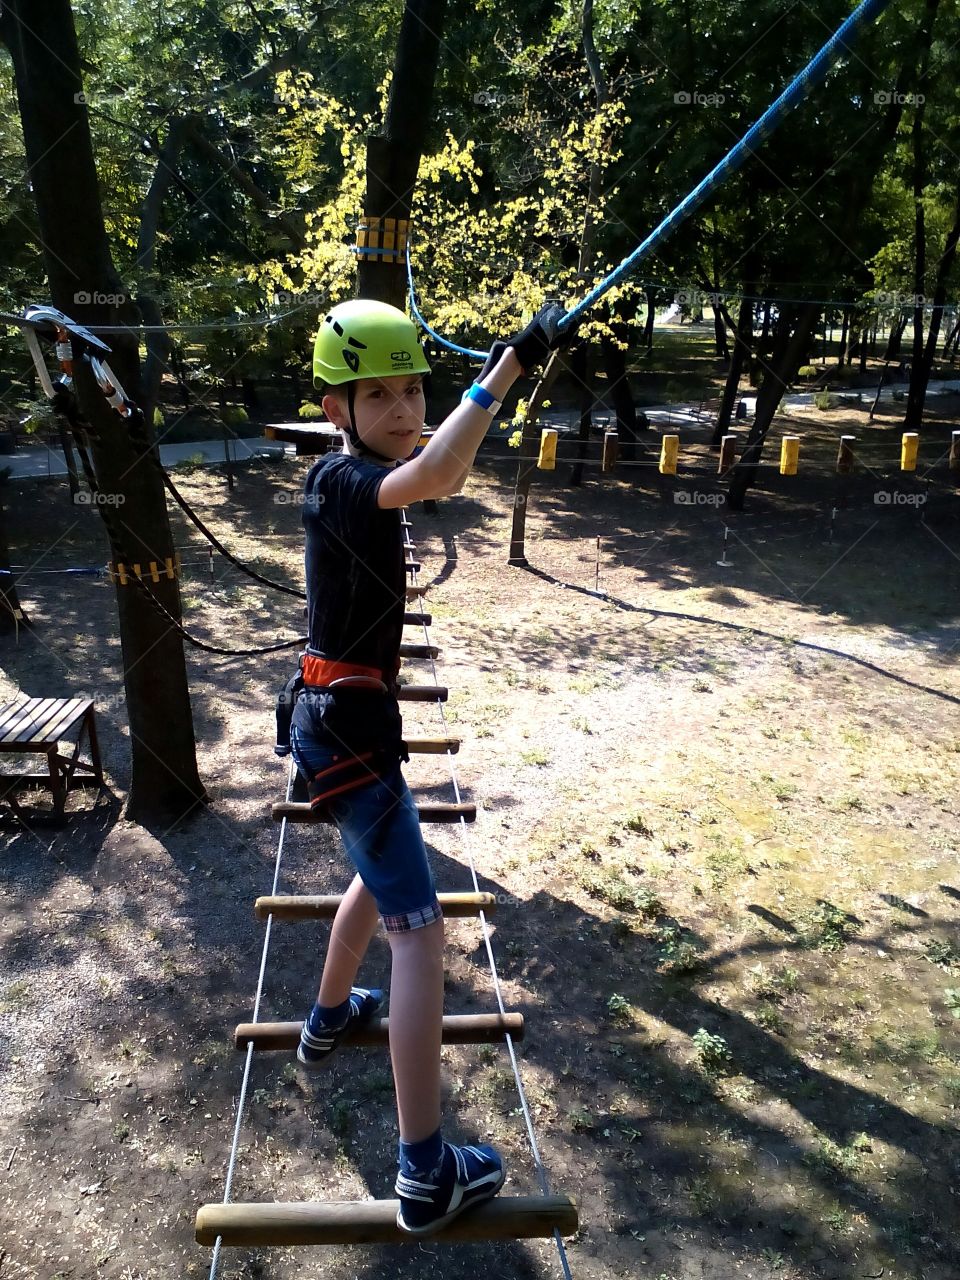 Equilibrist. Tightrope walker. I like to climb the ropes. Conquering new heights. Extreme hobby. On day of life. Last warm days. Positive emotions. Rope park. Brave. Fearless. Sports. On high.